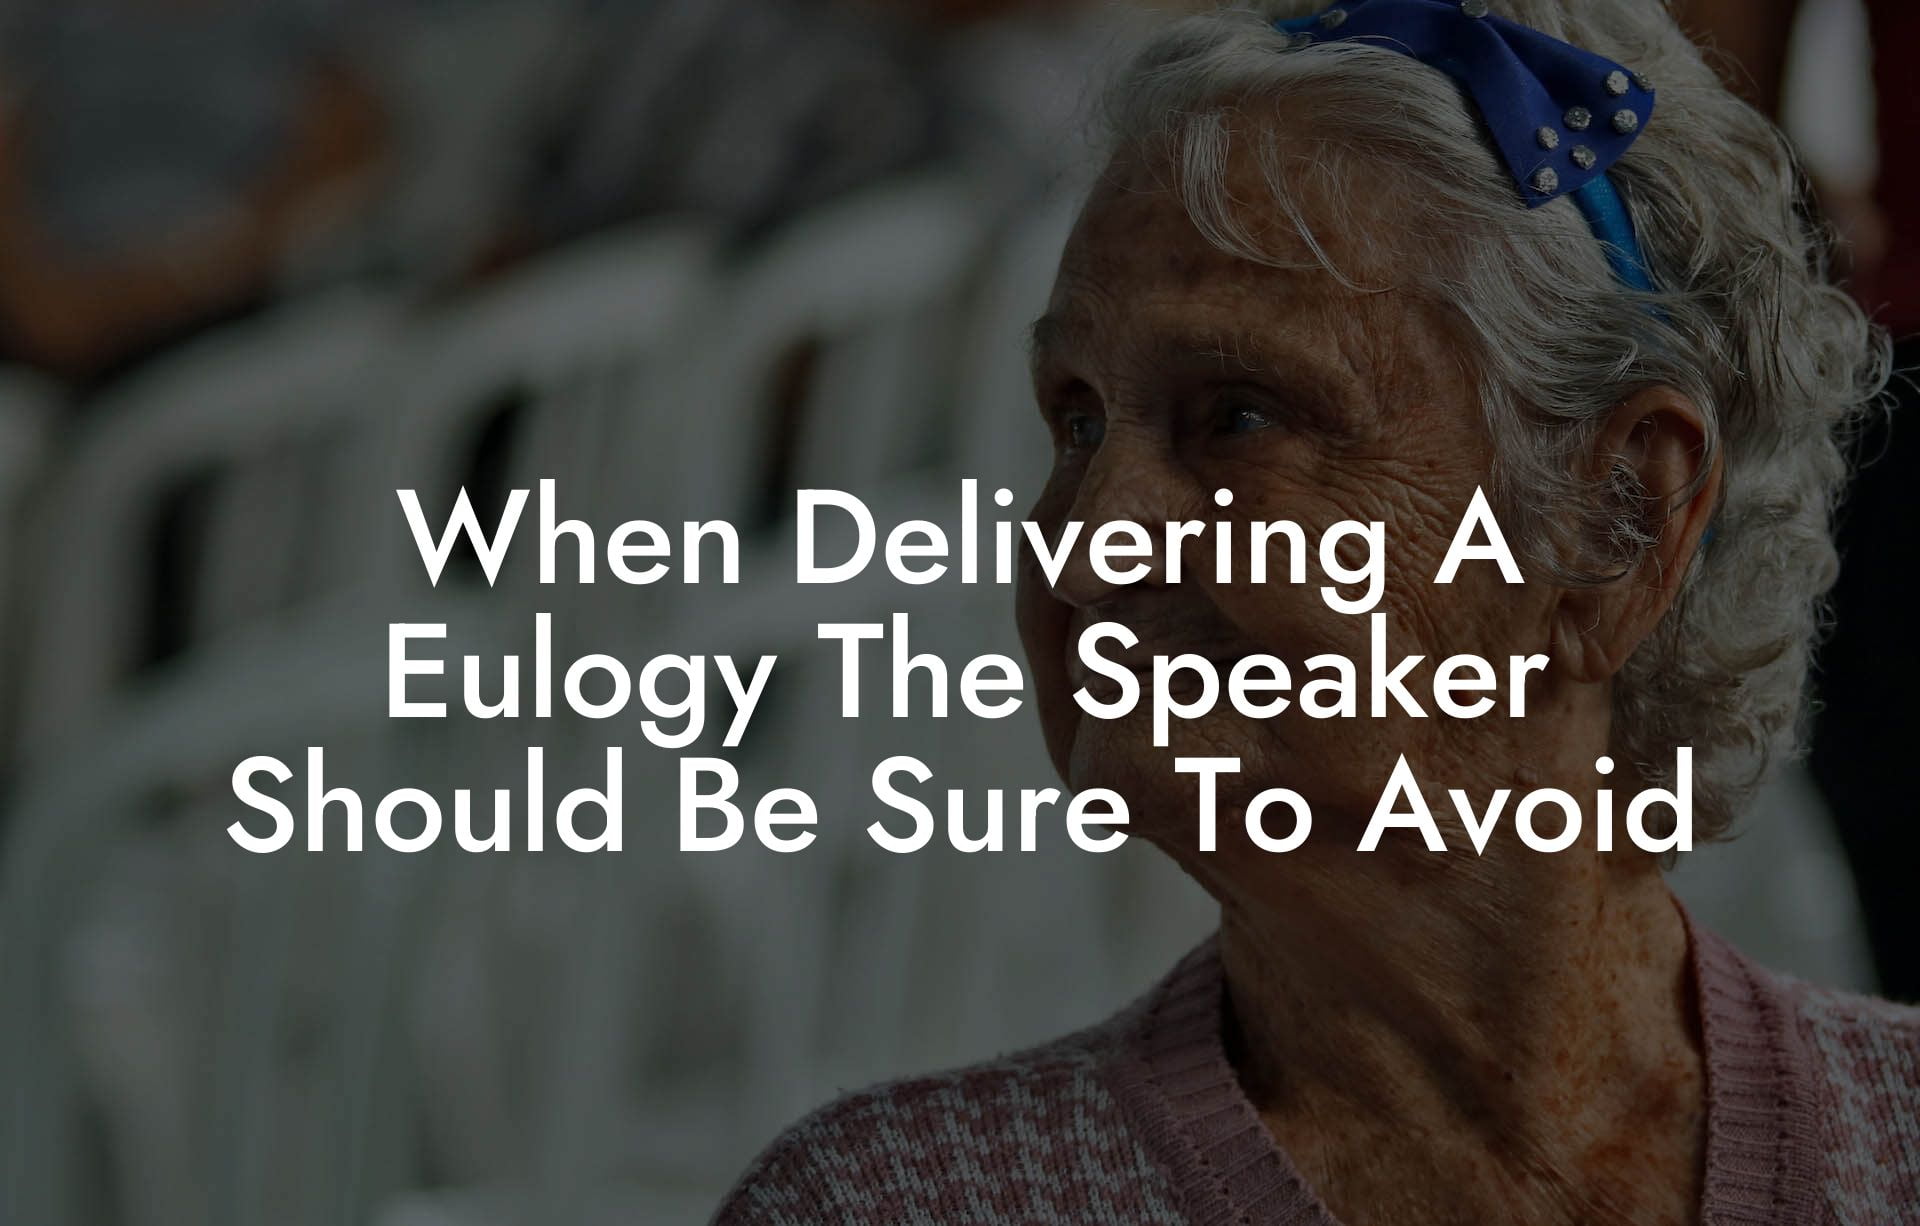 When Delivering A Eulogy The Speaker Should Be Sure To Avoid